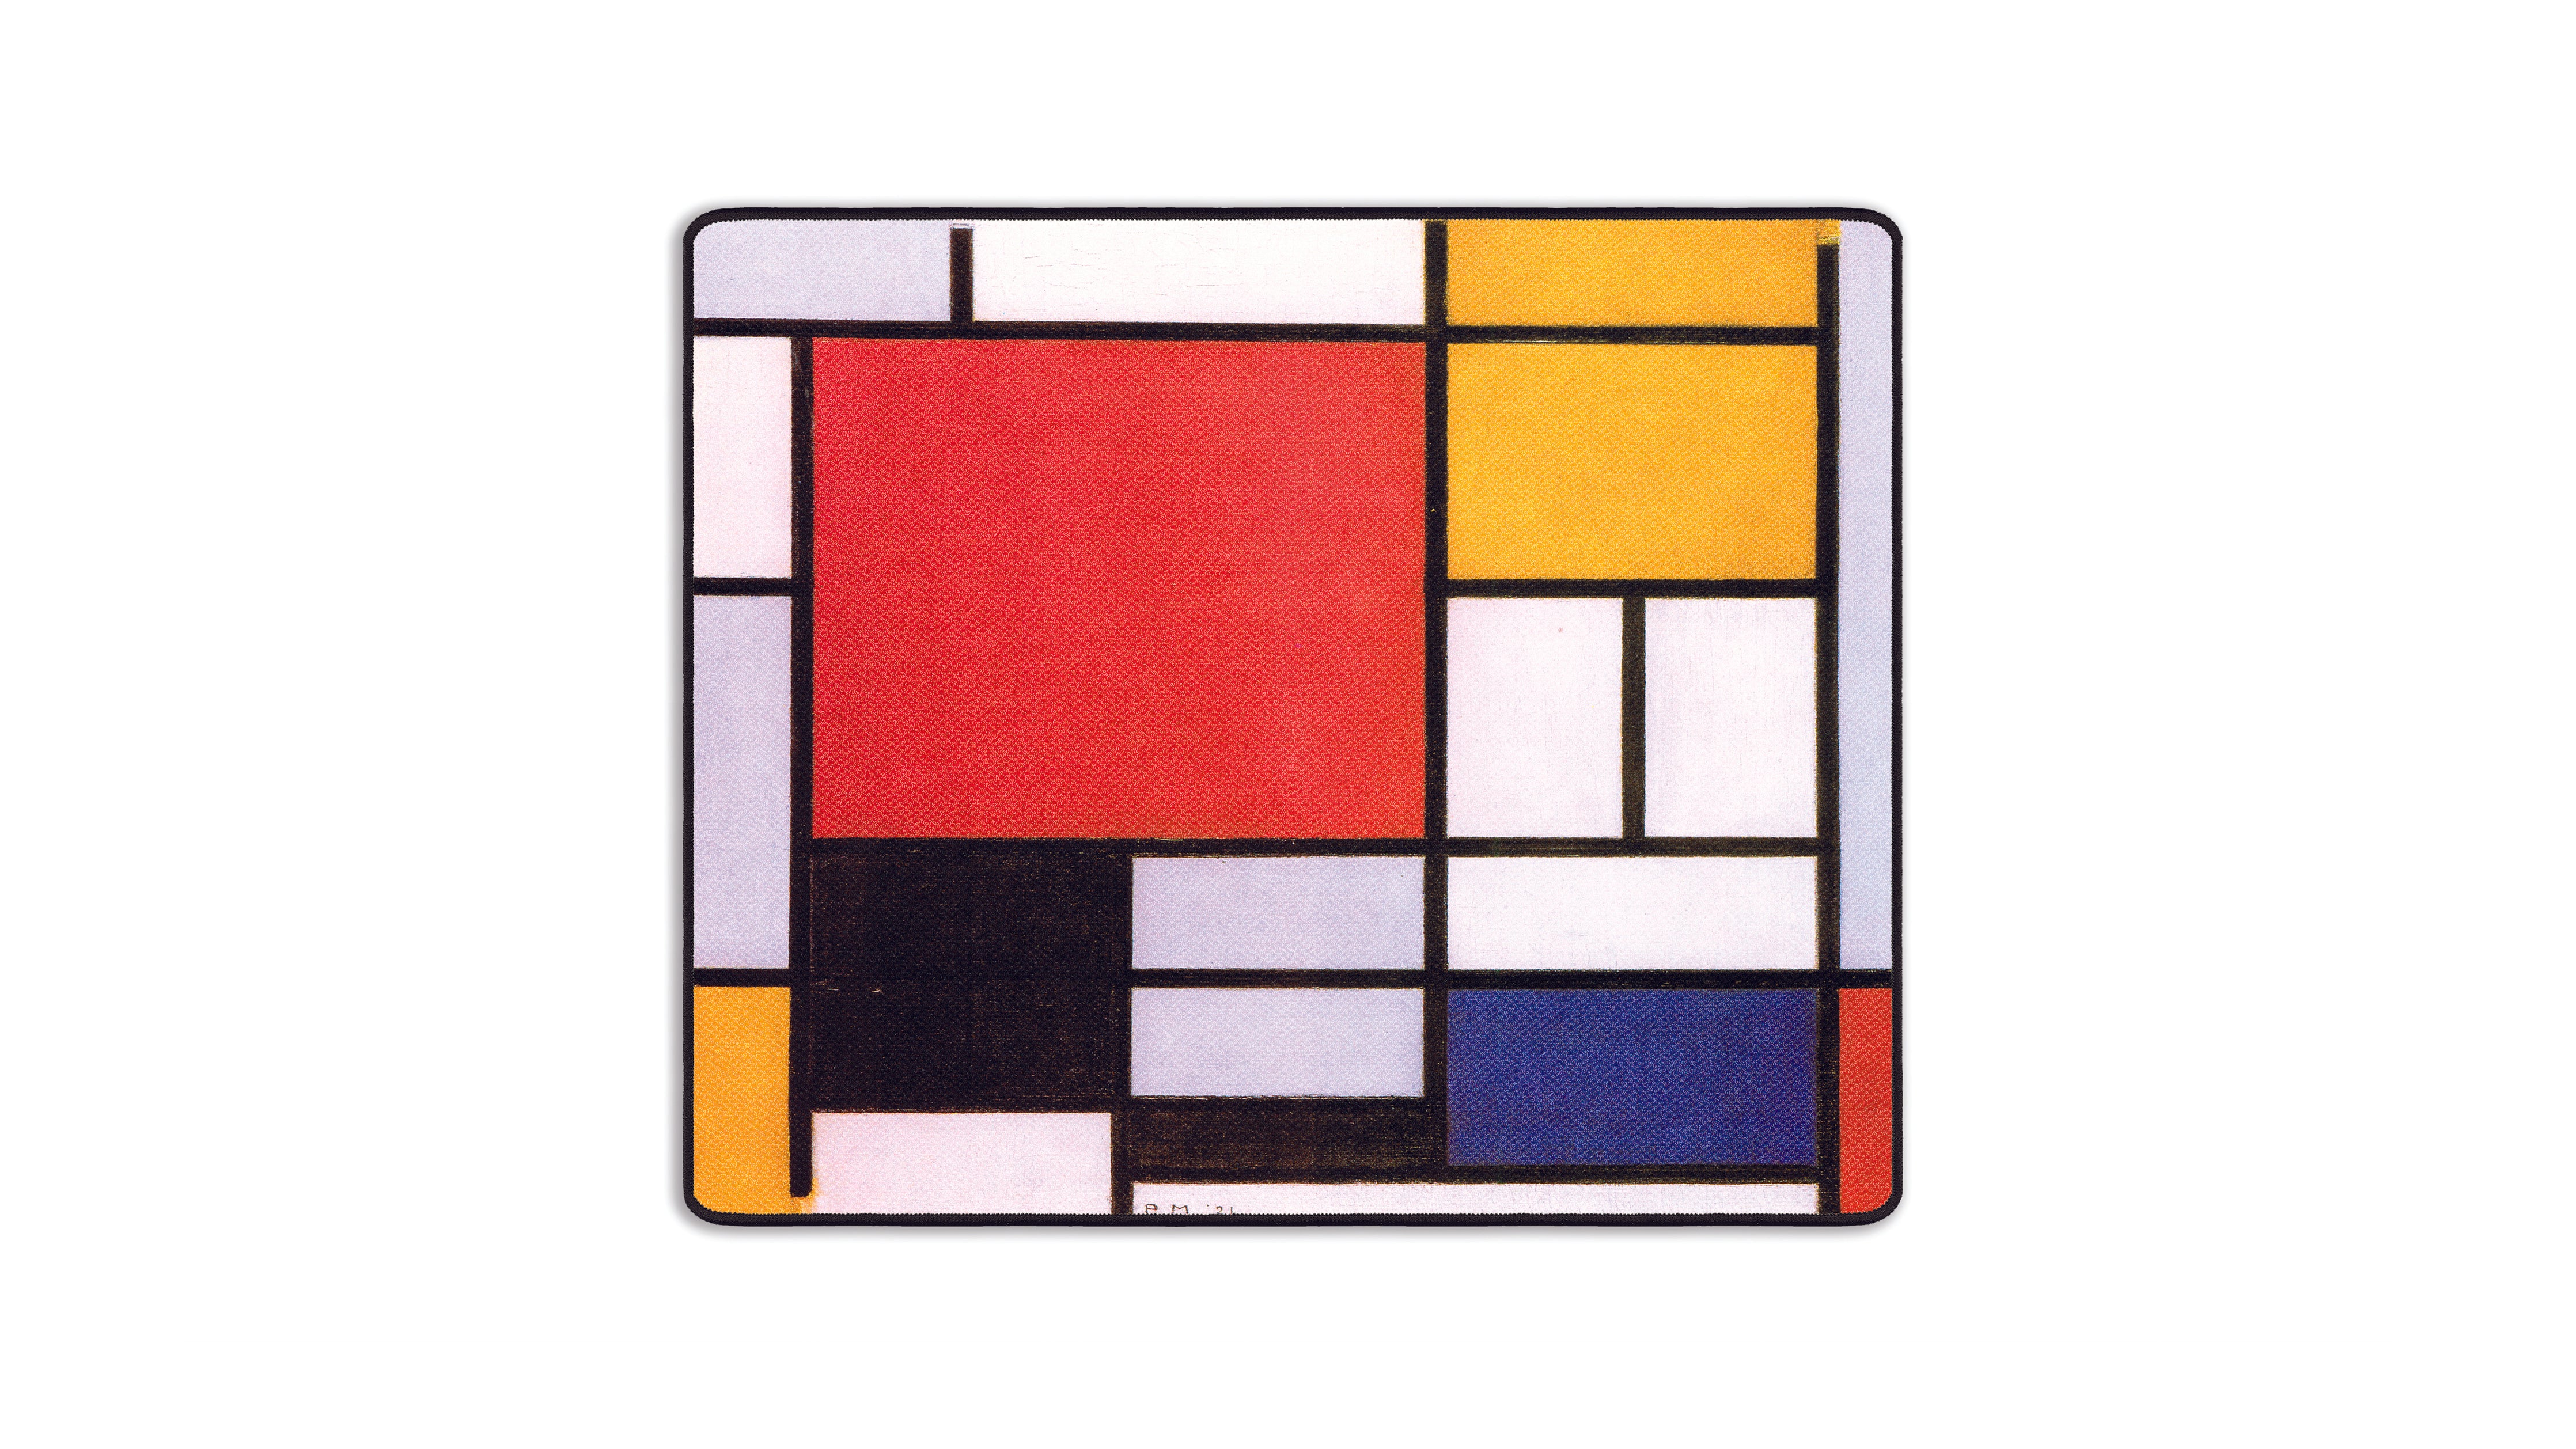 Composition No.III with Red, Yellow and Blue, by Piet Mondrian (1929) - The Mousepad Company